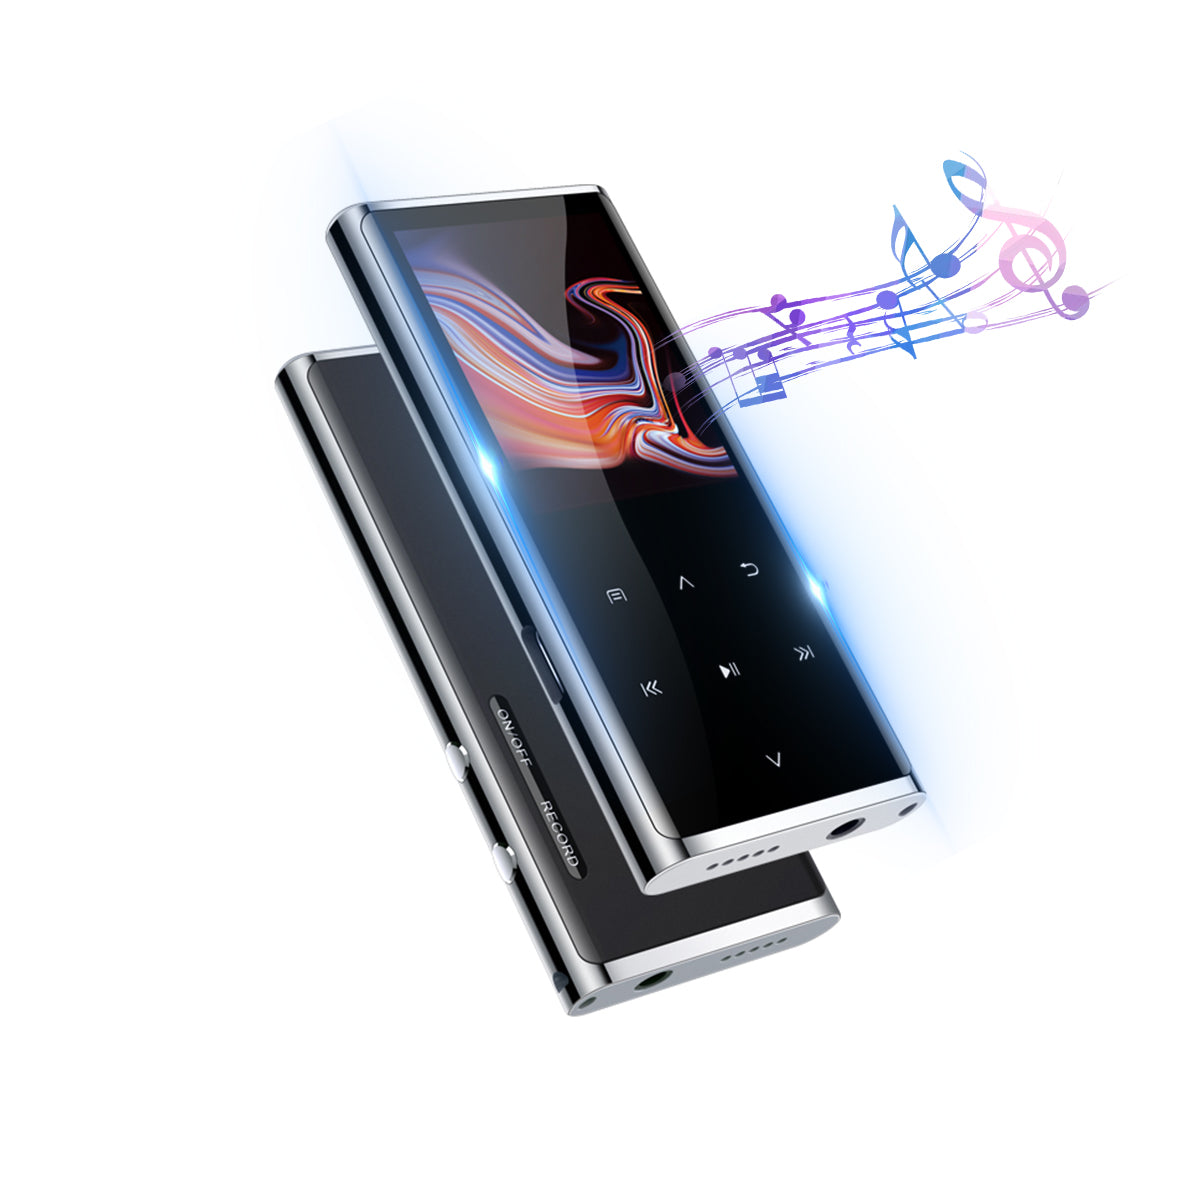 Verilux MP3 Player, Touchscreen MP3?Player?with?Bluetooth, 1.8Inch Screen Music Player with Built-in 4GB Storage, Light Metal Mp3?Player?with?Speaker, FM Radio, Voice Recorde, Video E-Book (1pcs)